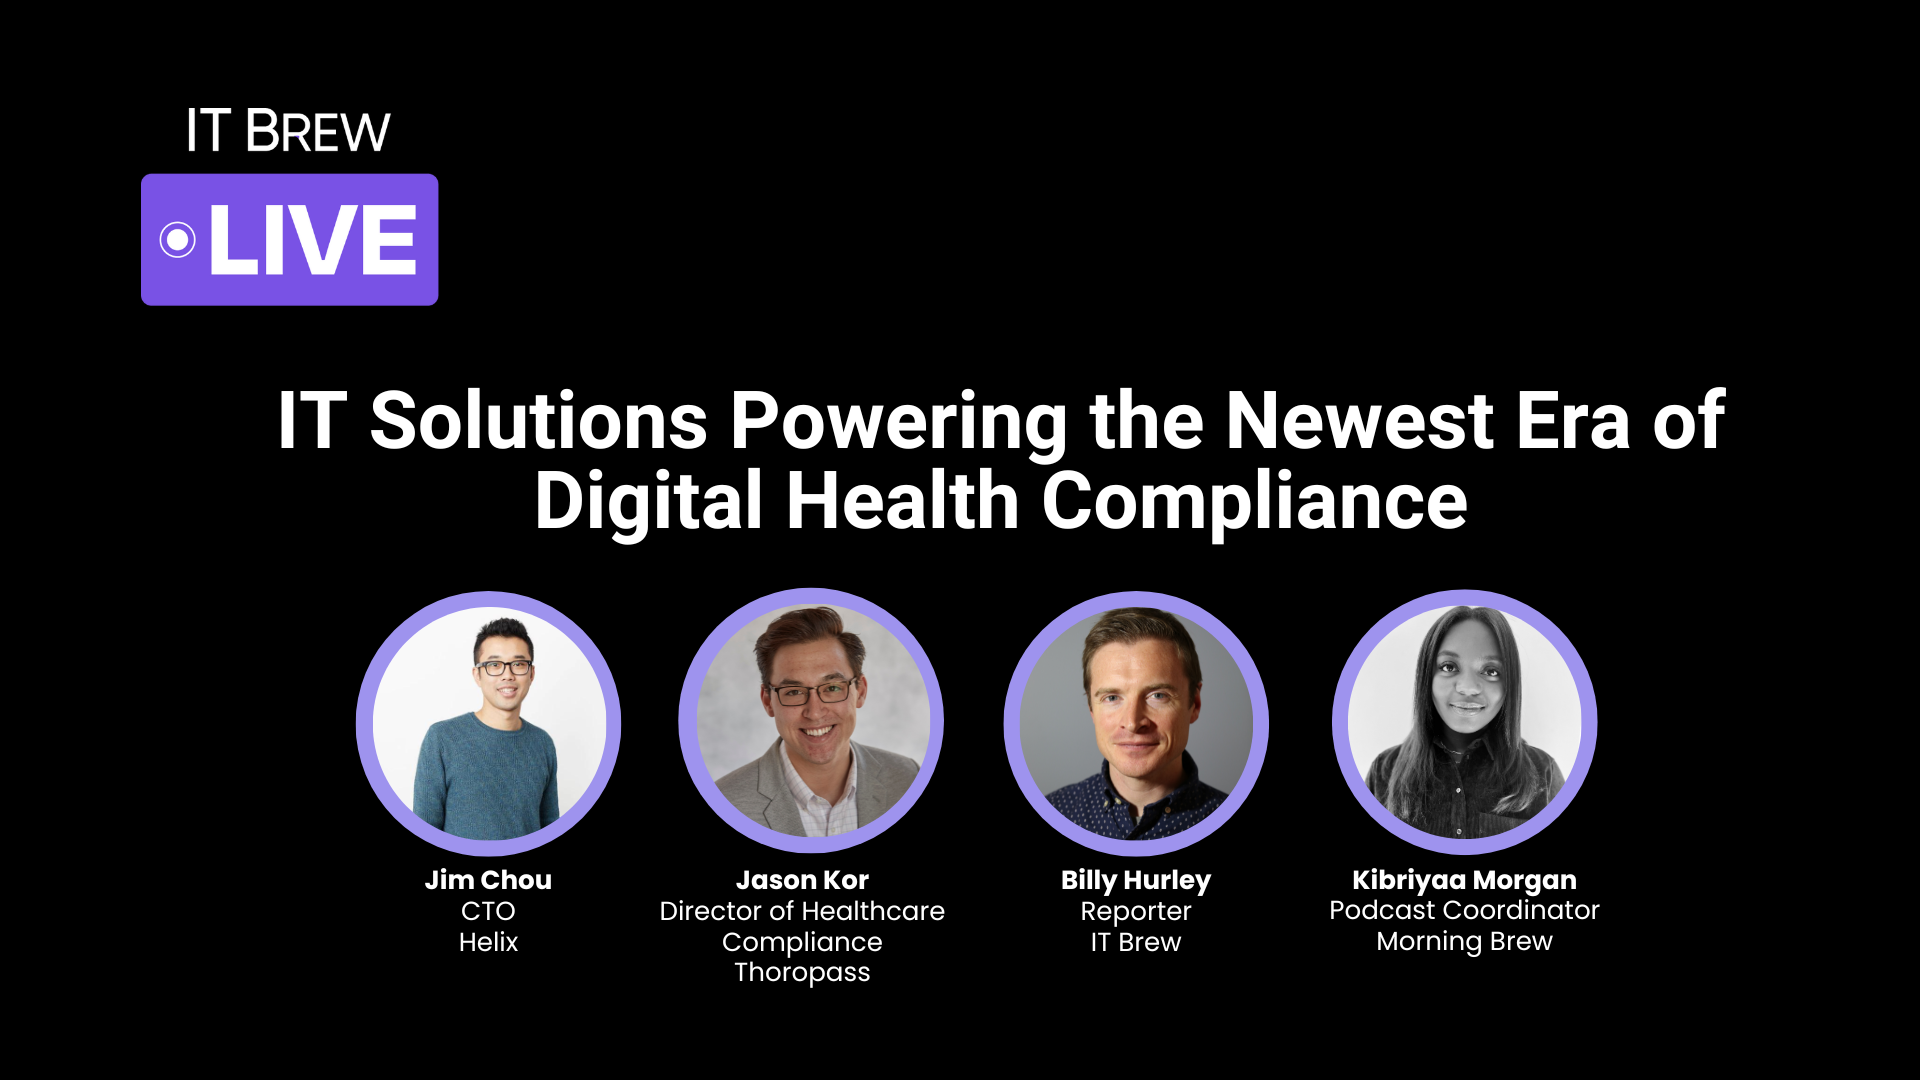 IT Brew Live logo with "It Solutions Powering the Newest Era of Digital Health Compliance" text and four speaker headshots